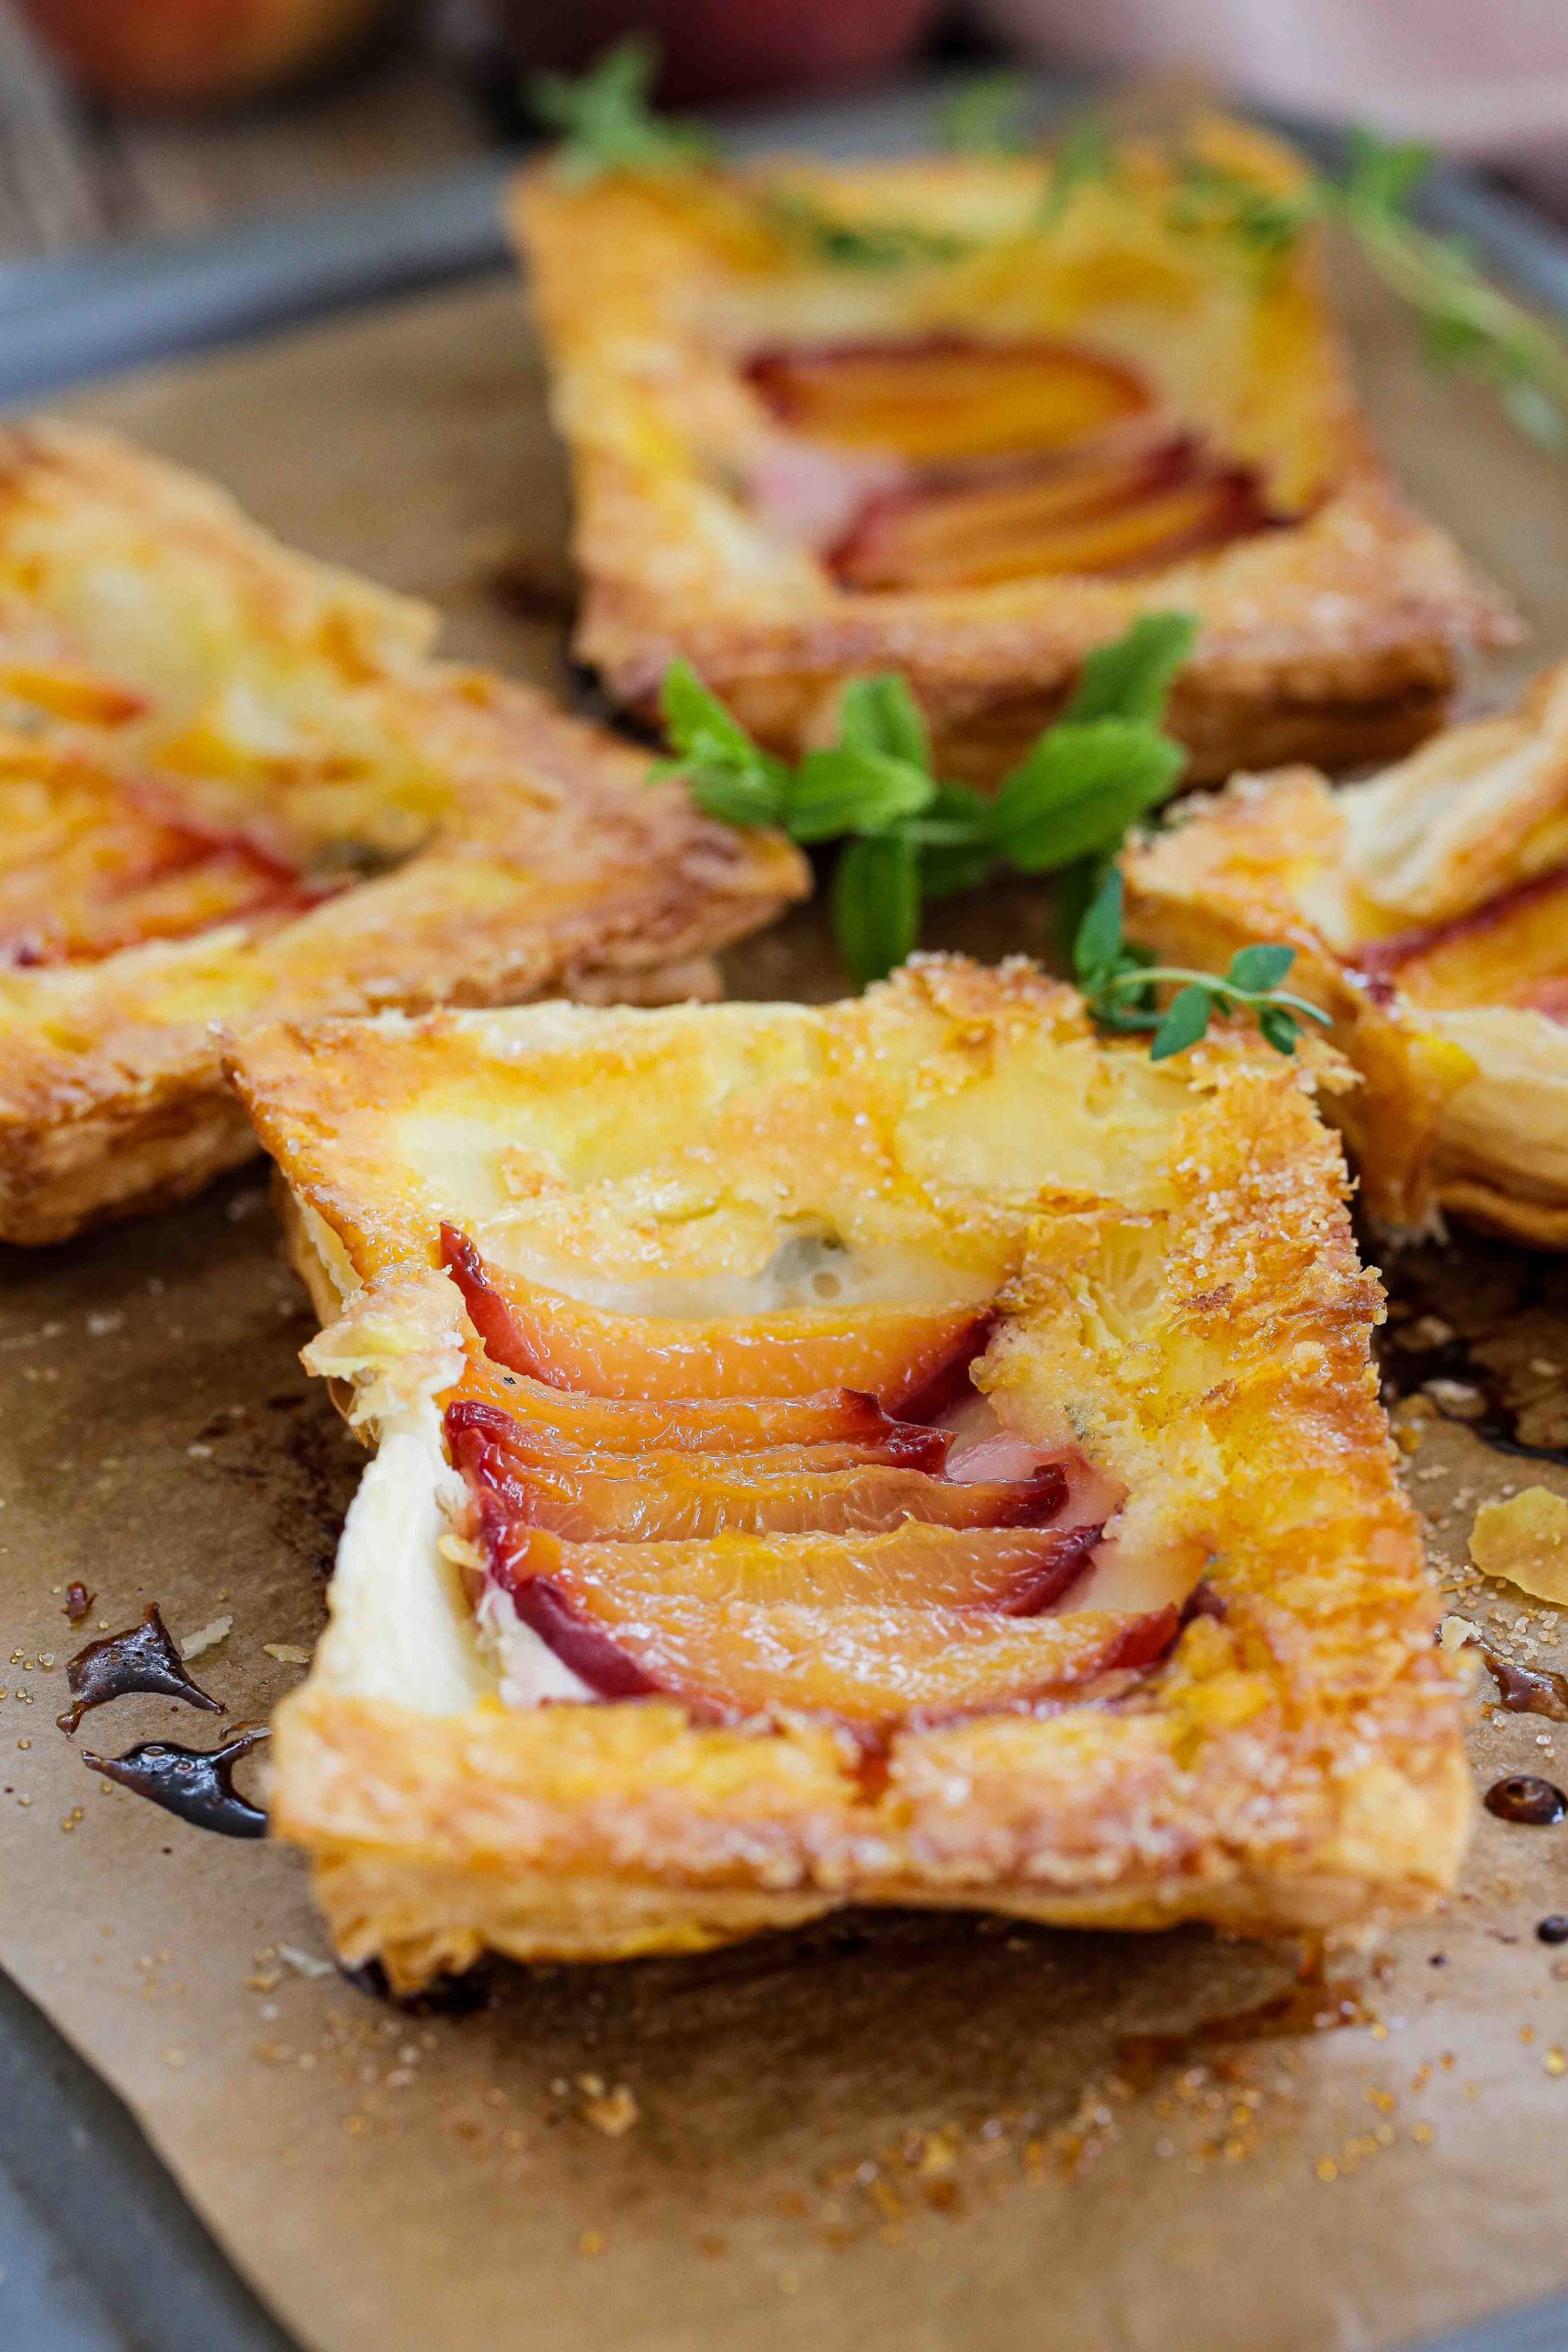 Delicious vegan desserts don't come any easier than these peach upside down tarts. The herb cream cheese adds even more garden fresh flavour! Recipe on thecookandhim.com | #vegandessertrecipes #veganpastries #upsidedowntarts #creamcheesetarts #puffpastry